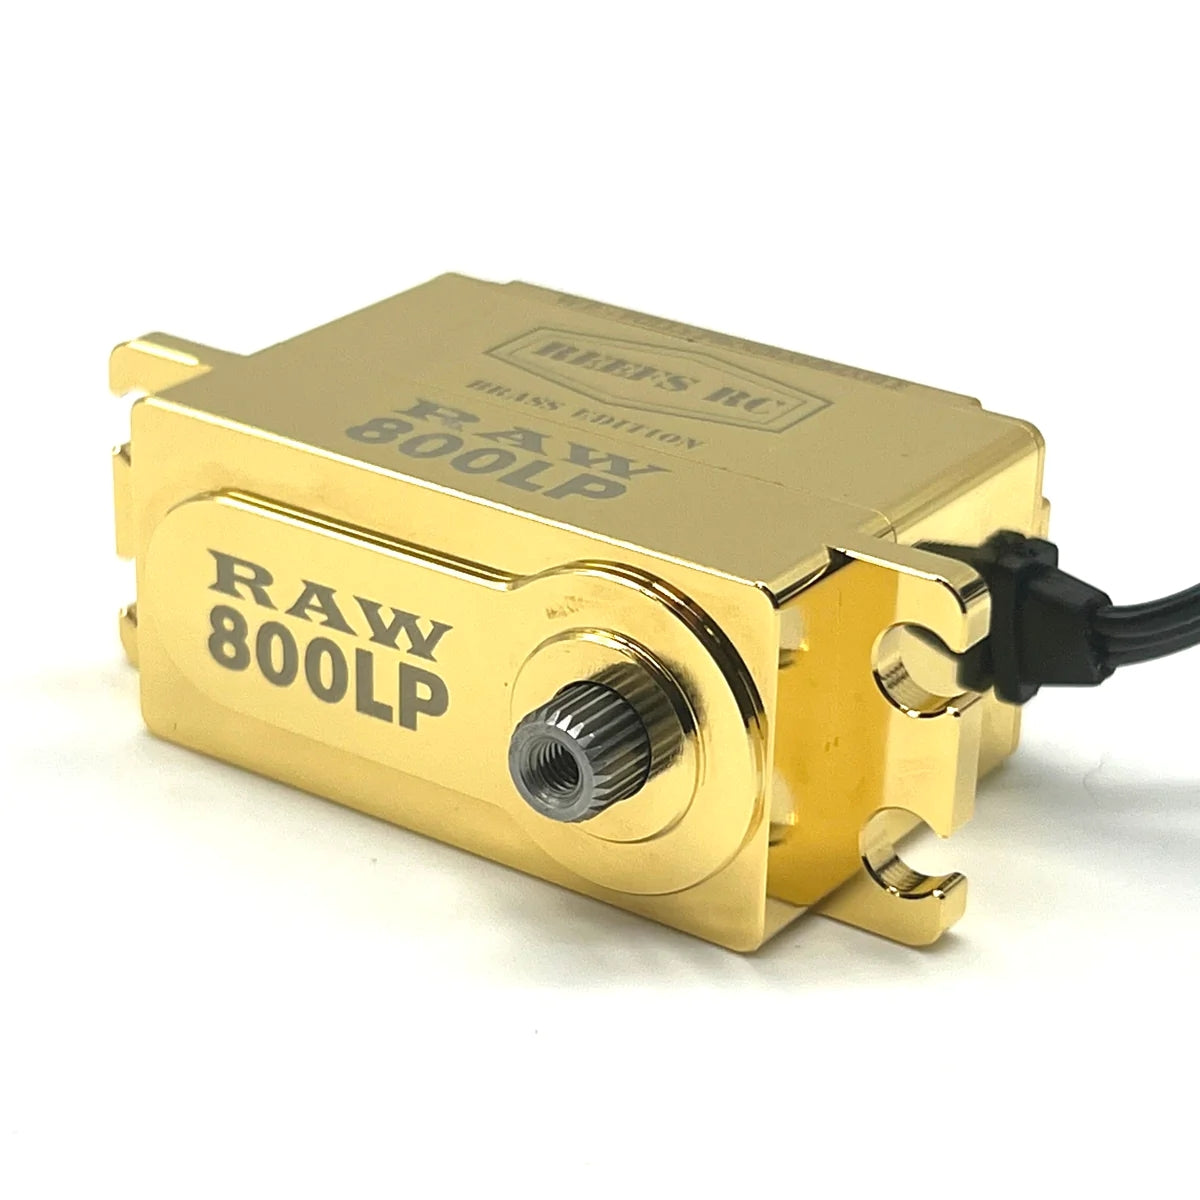 REEFS RC REEFS160 RAW800LP Brass Edition, Fully Programmable, Brushless Low Profile Servo